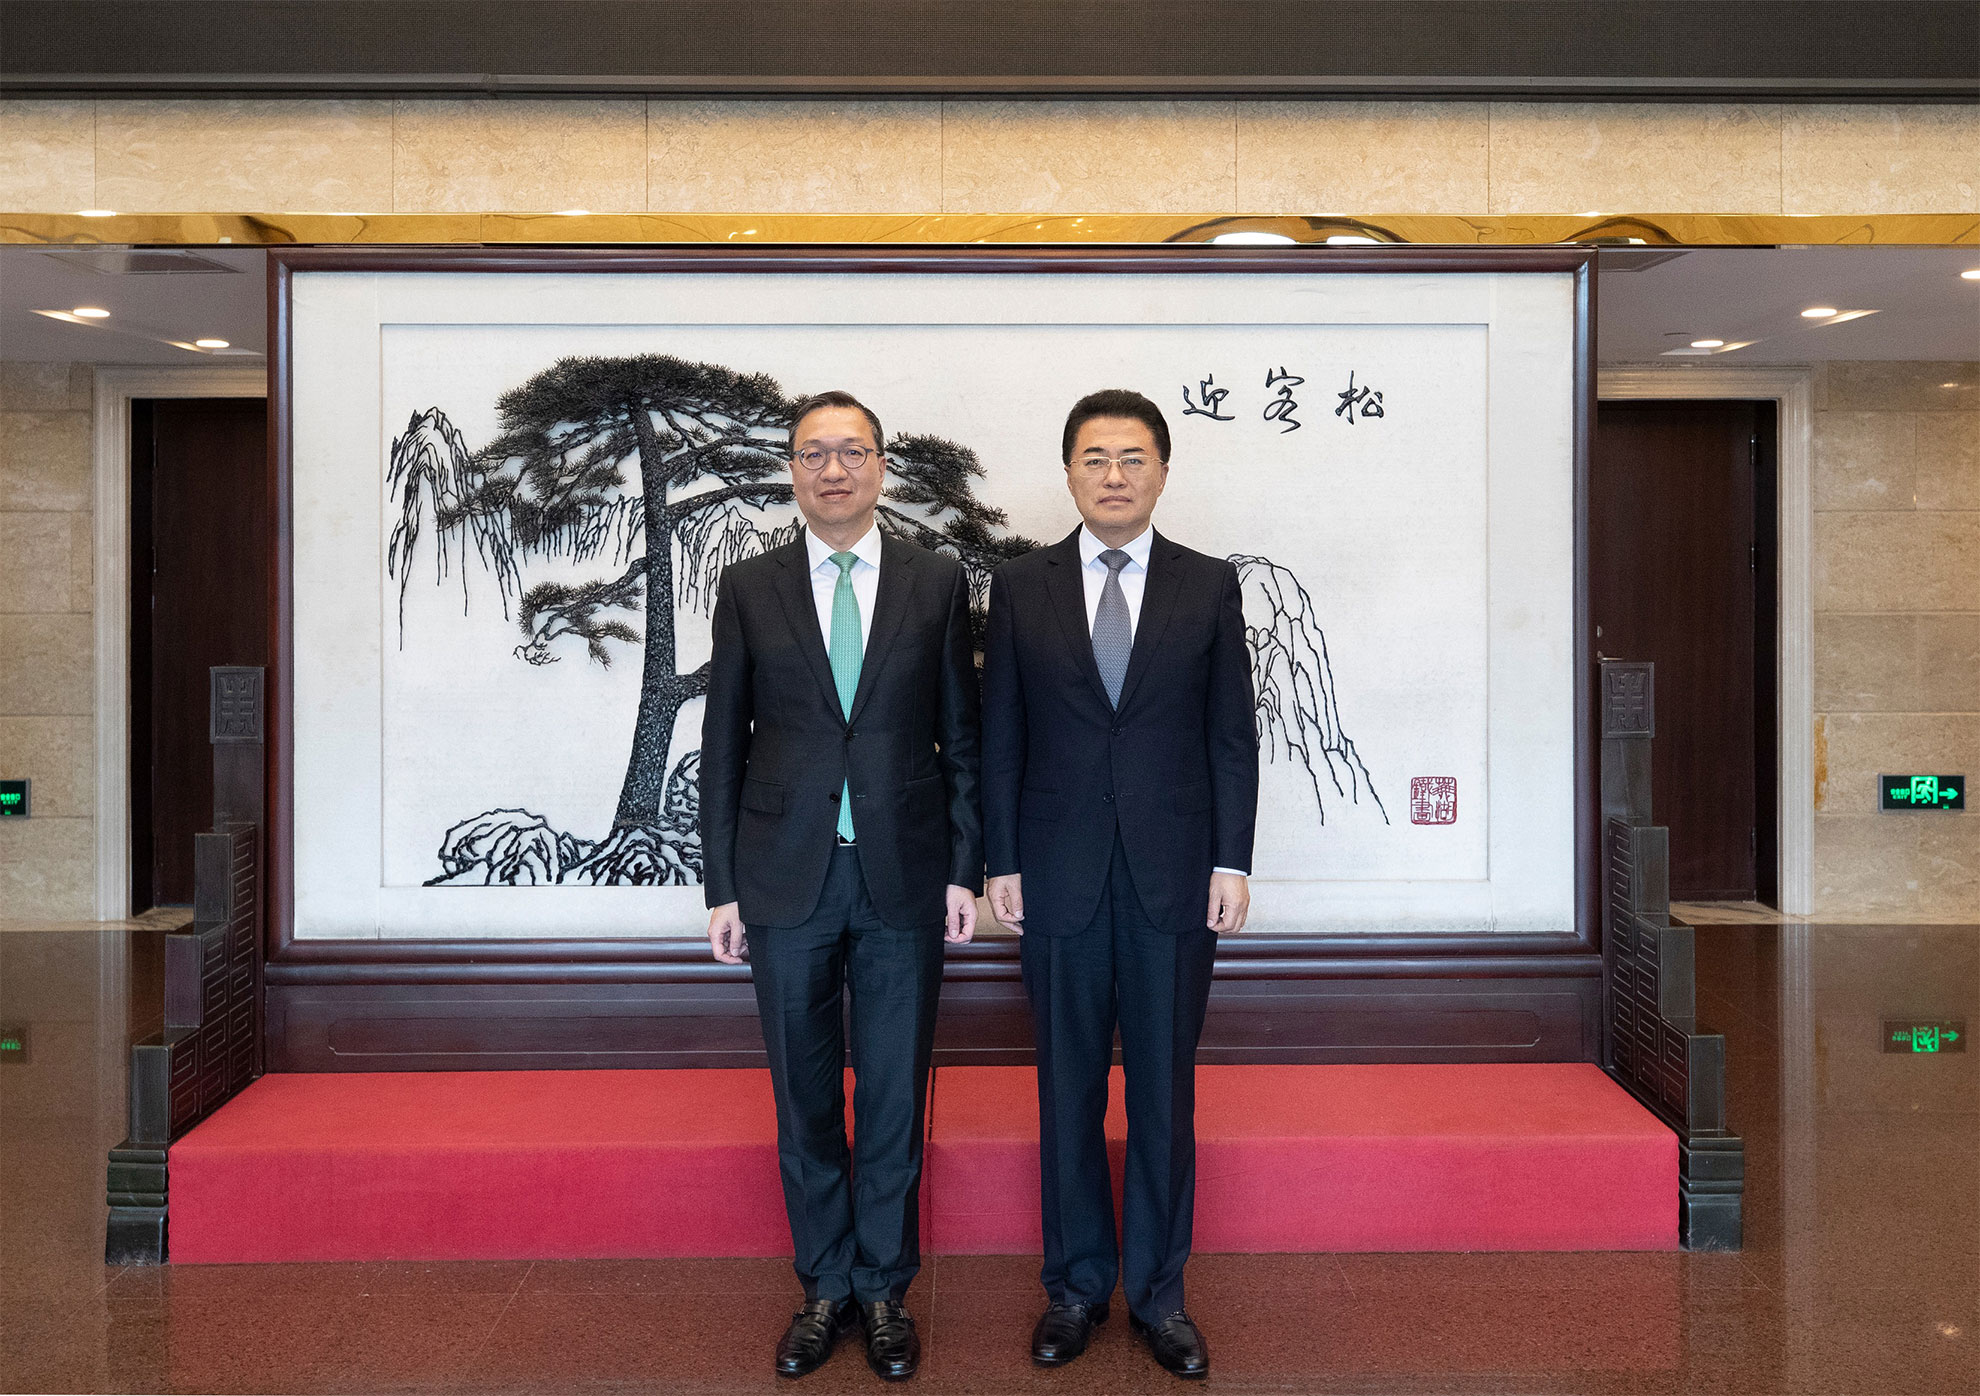 The Secretary for Justice, Mr Paul Lam, SC (left), visits the State-owned Assets Supervision and Administration Commission of the State Council and meets with its Vice Chairman Mr Weng Jieming (right) on the afternoon of May 29 in Beijing. Photo shows them before the meeting.